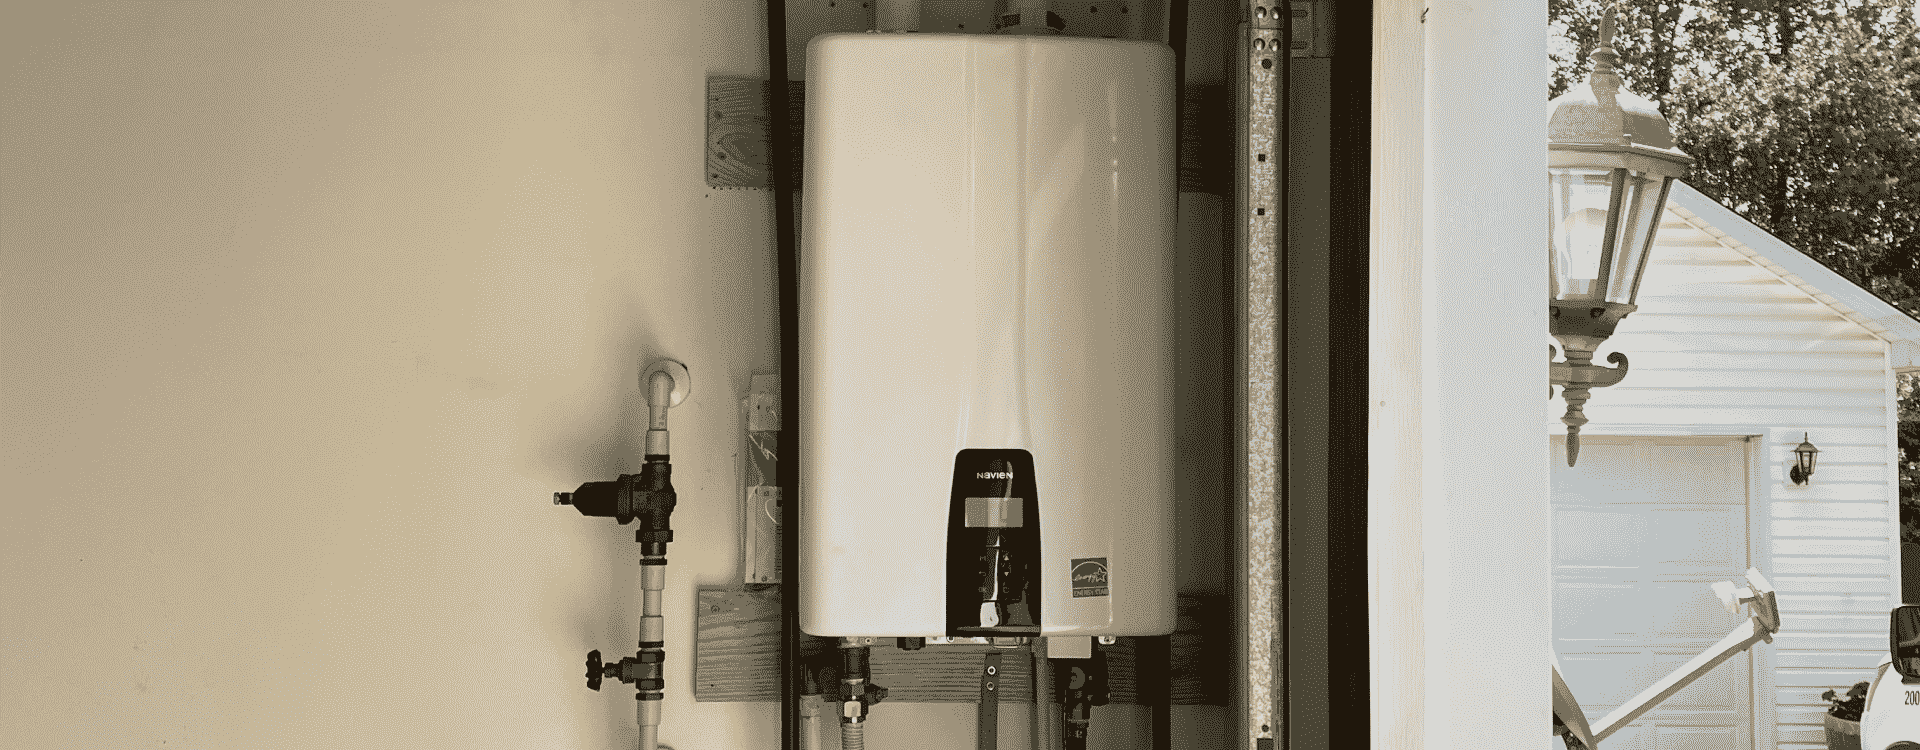 white water heater installation on a house with beige interior walls